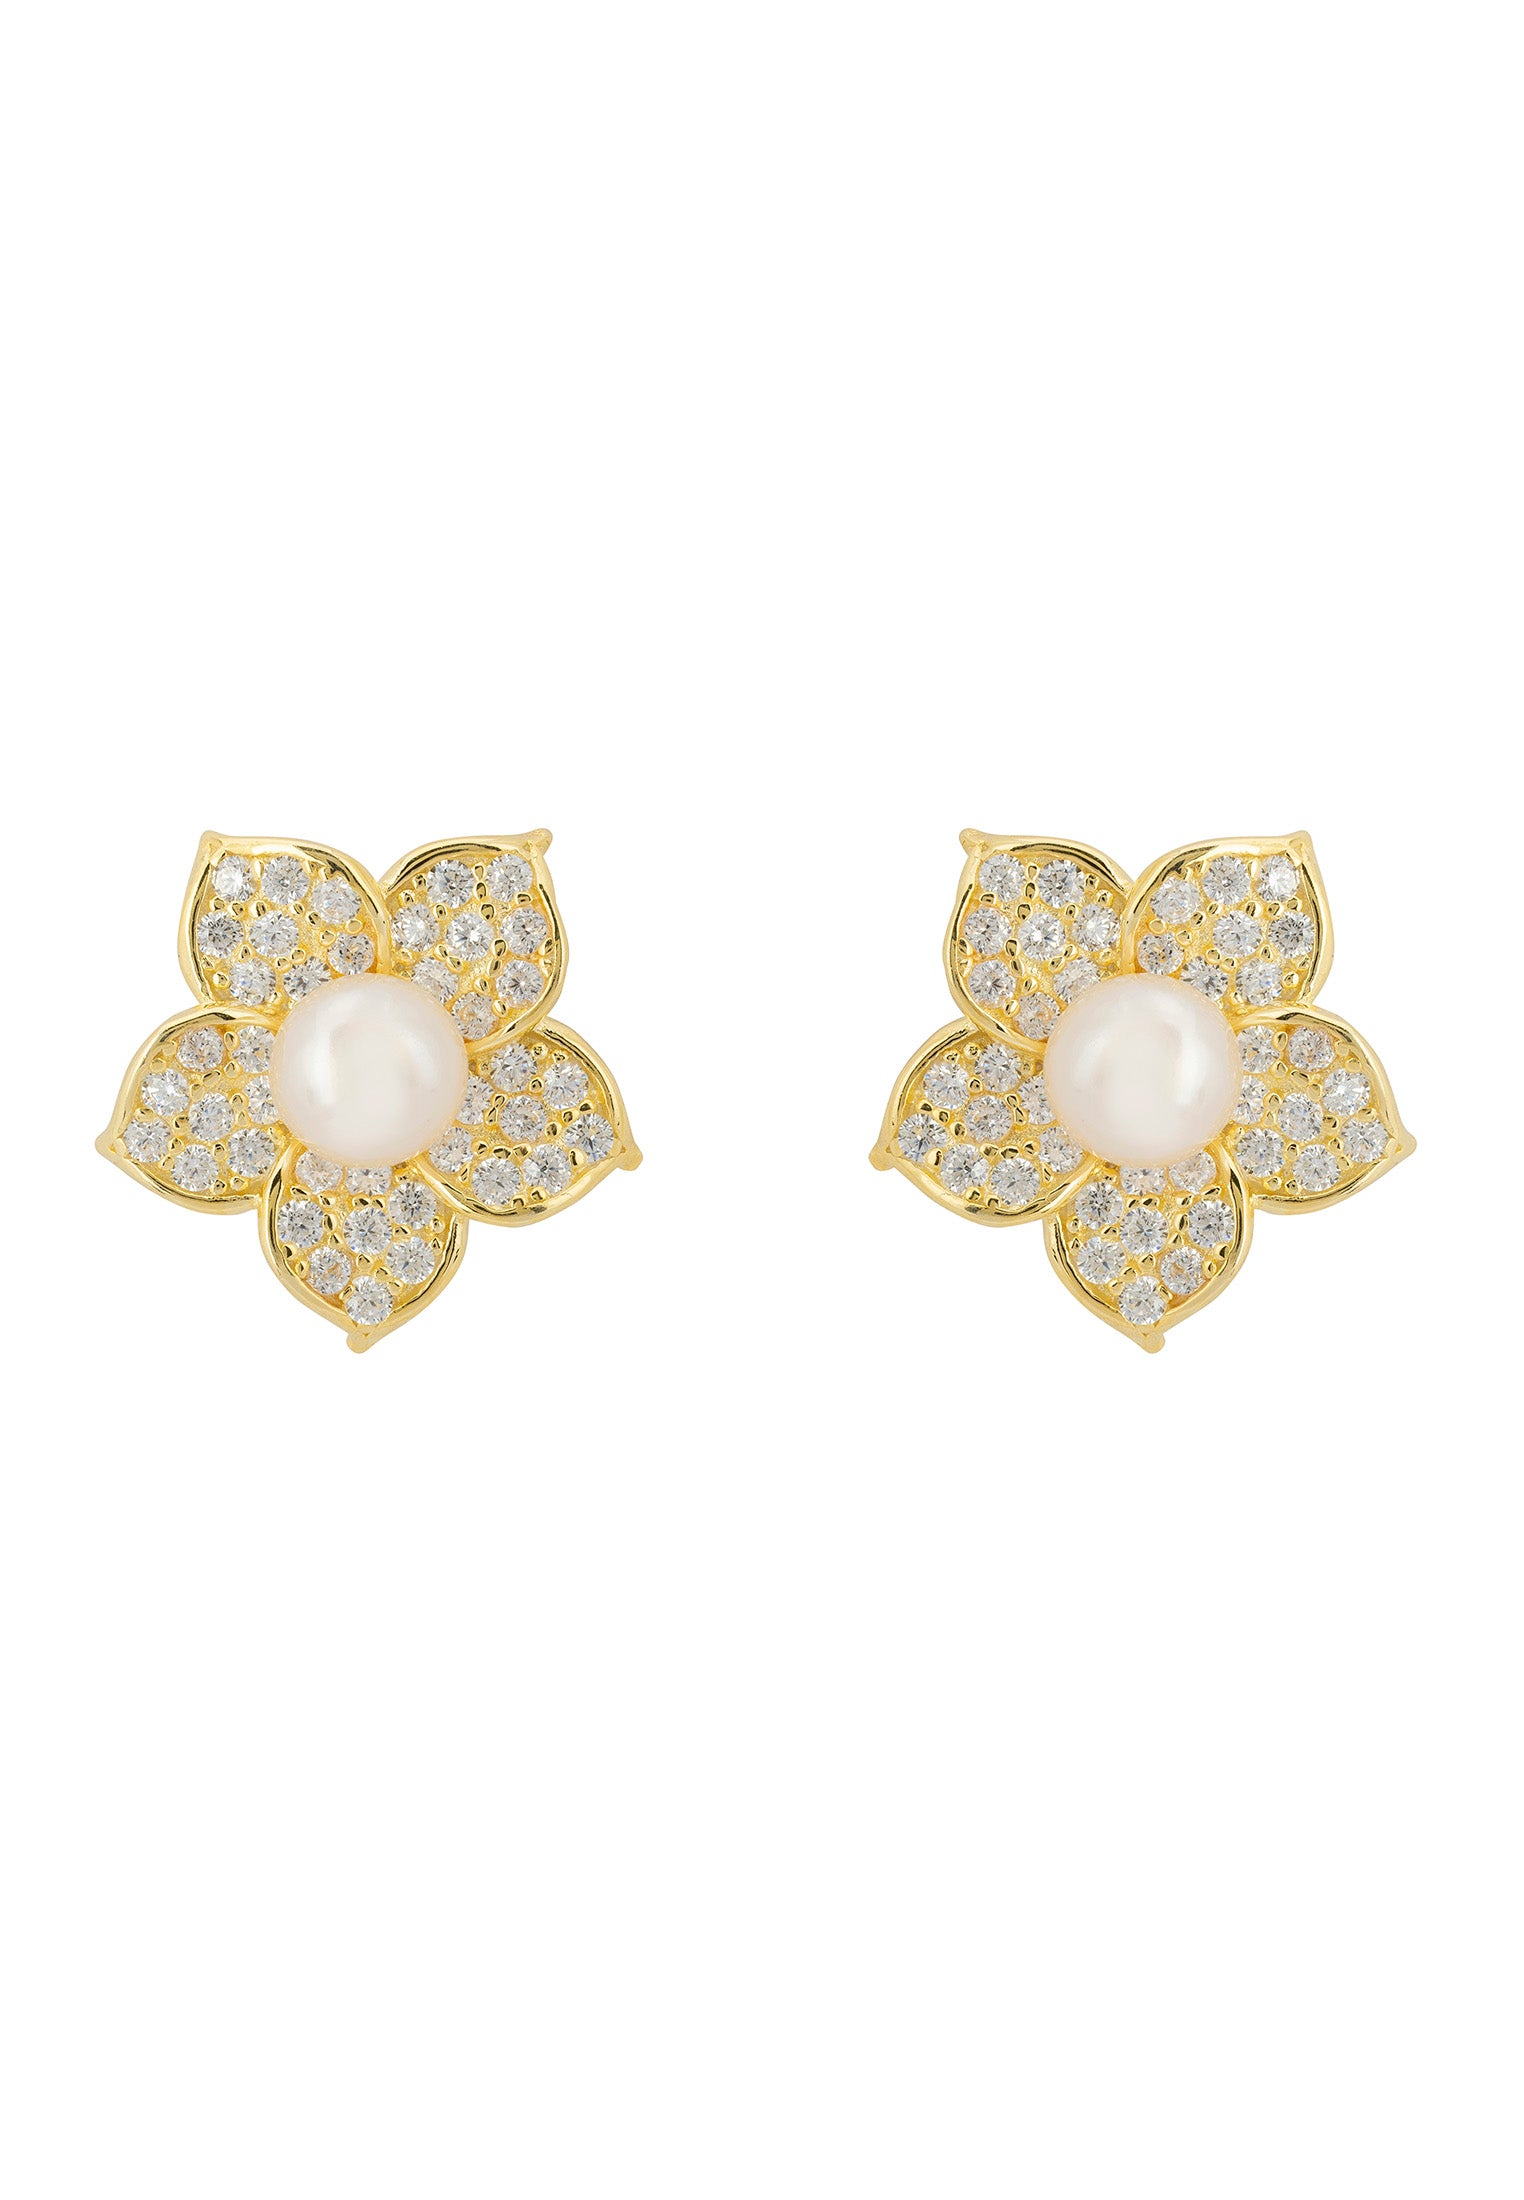 Forget Me Not Pearl Stud Earrings Gold